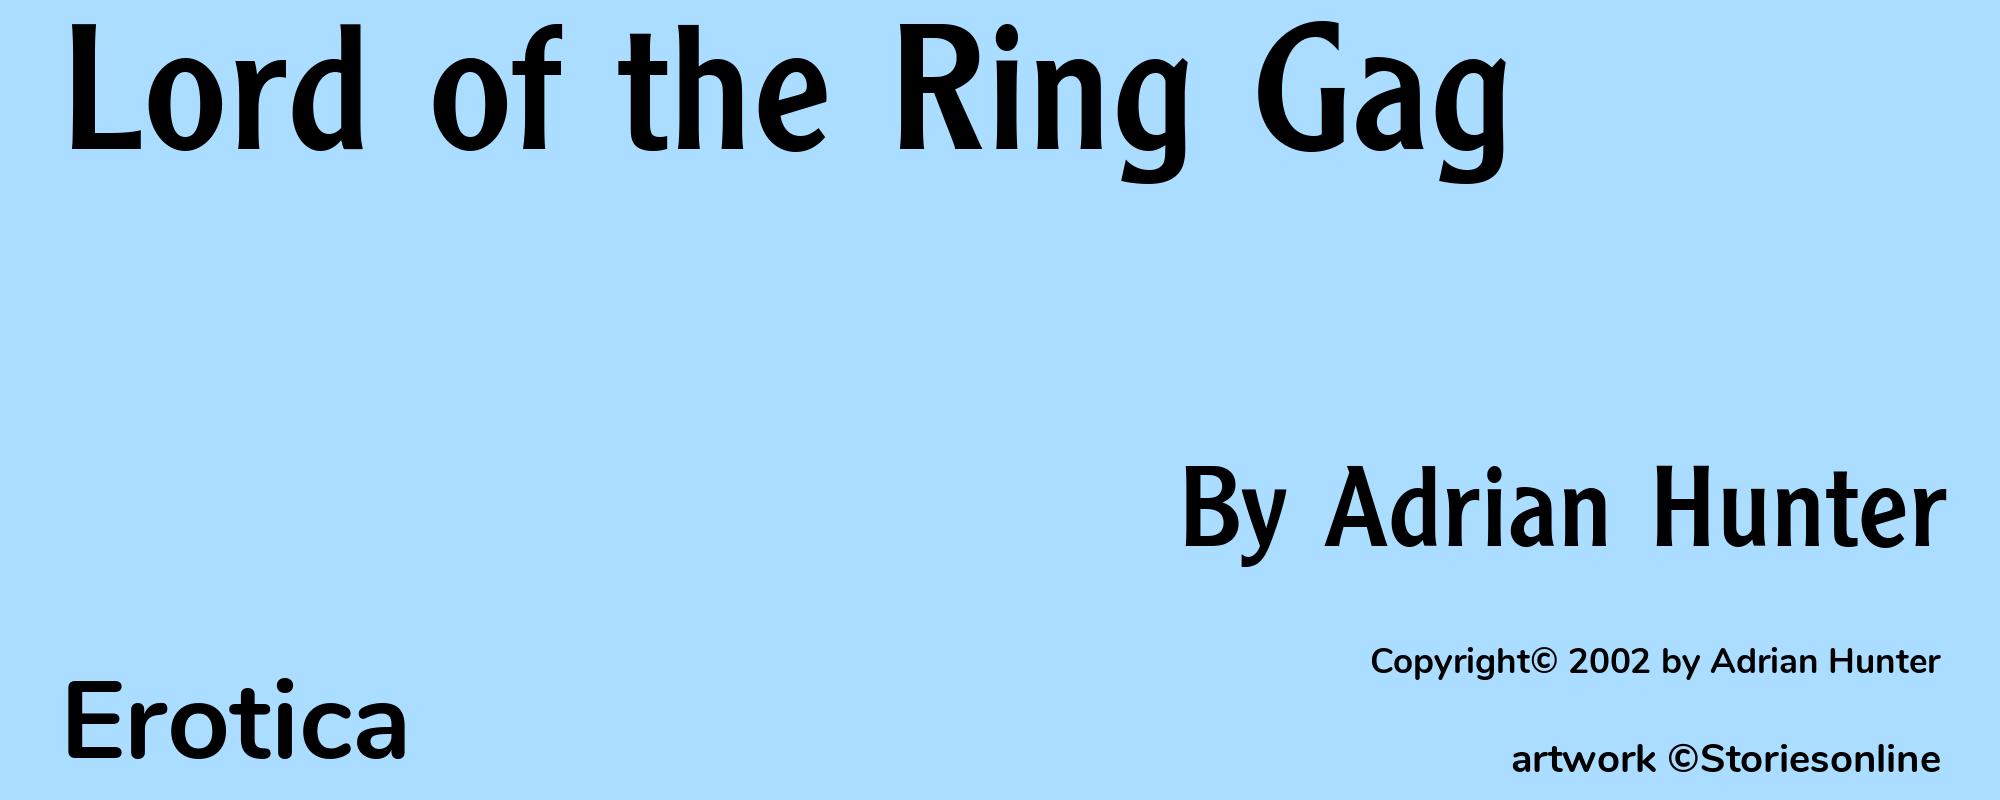 Lord of the Ring Gag - Cover